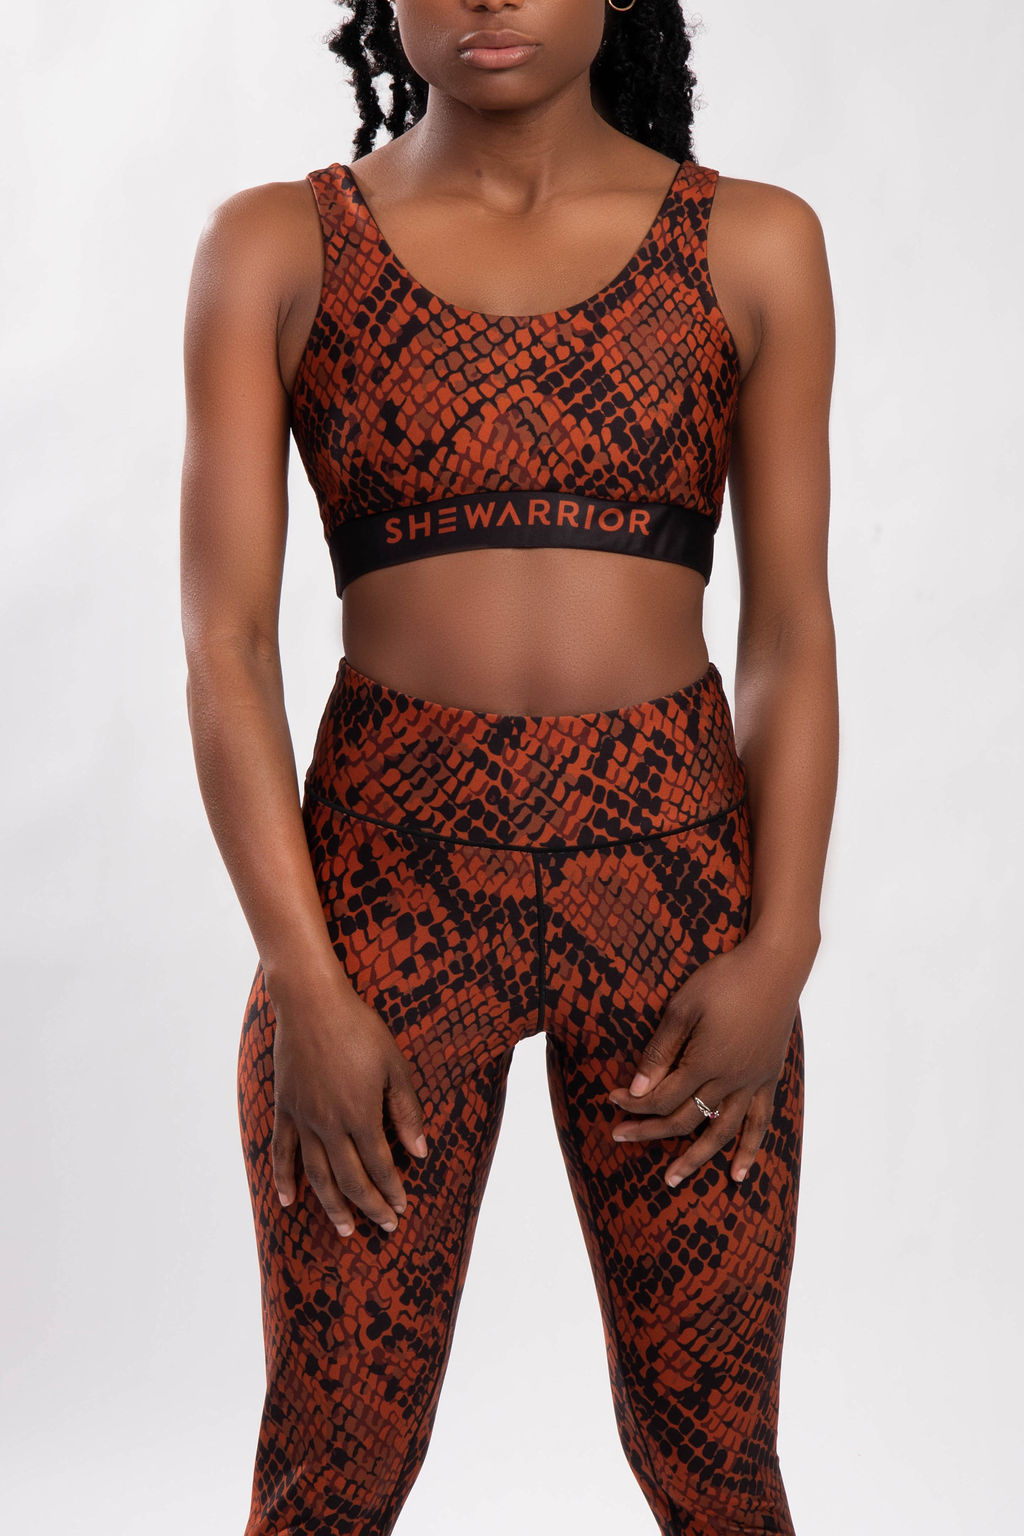 Copper Infused Sports Bra - Spectral Body - Copper Fabric Activewear